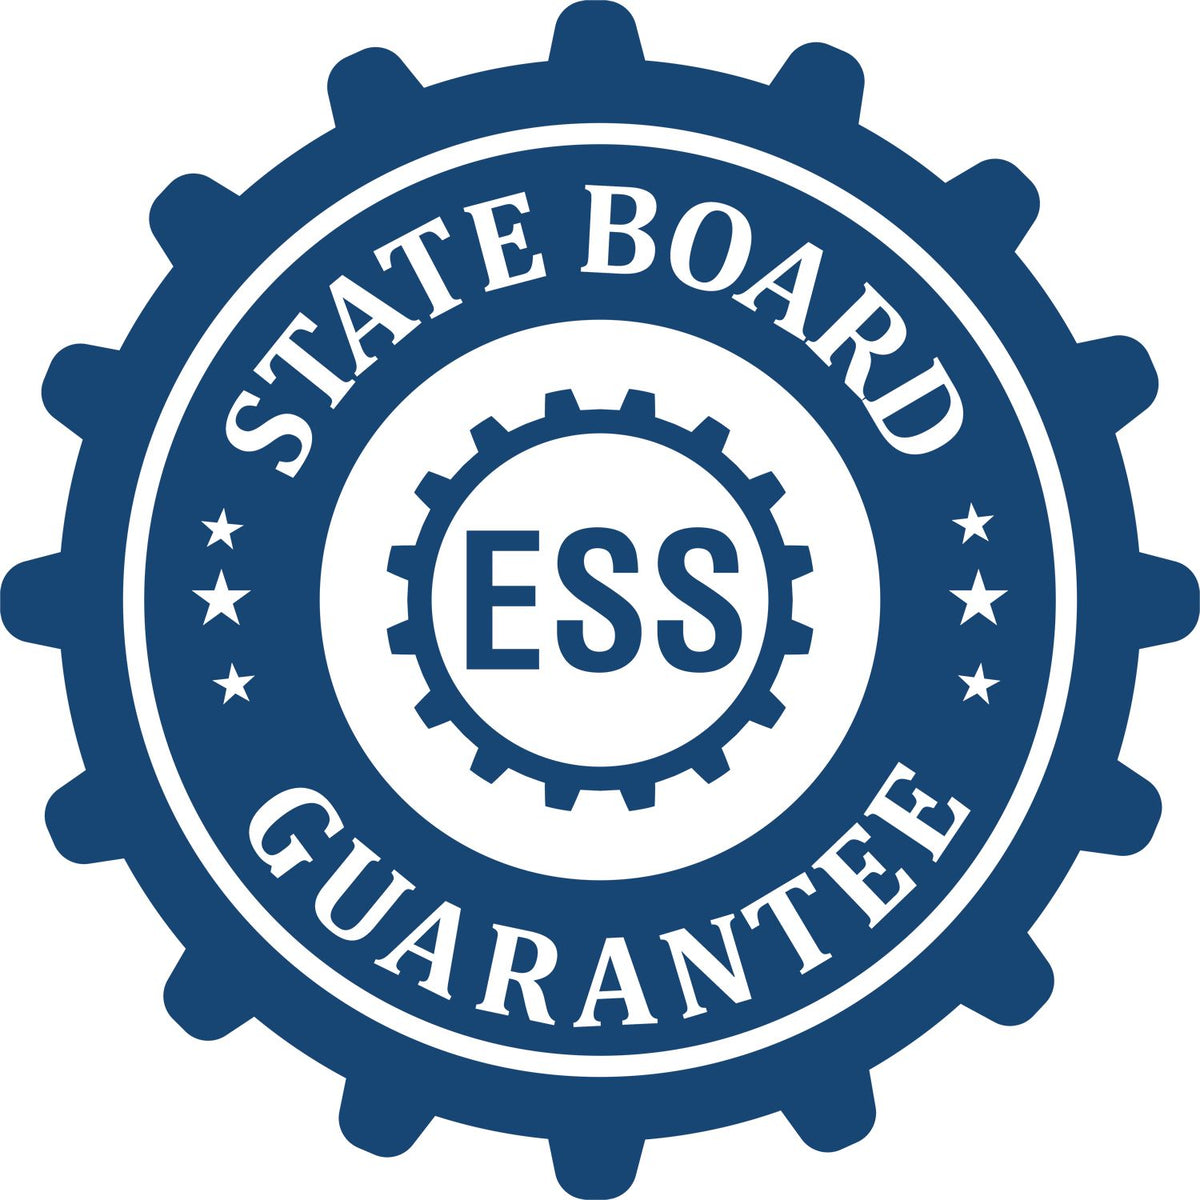 An emblem in a gear shape illustrating a state board guarantee for the Digital South Carolina PE Stamp and Electronic Seal for South Carolina Engineer product.